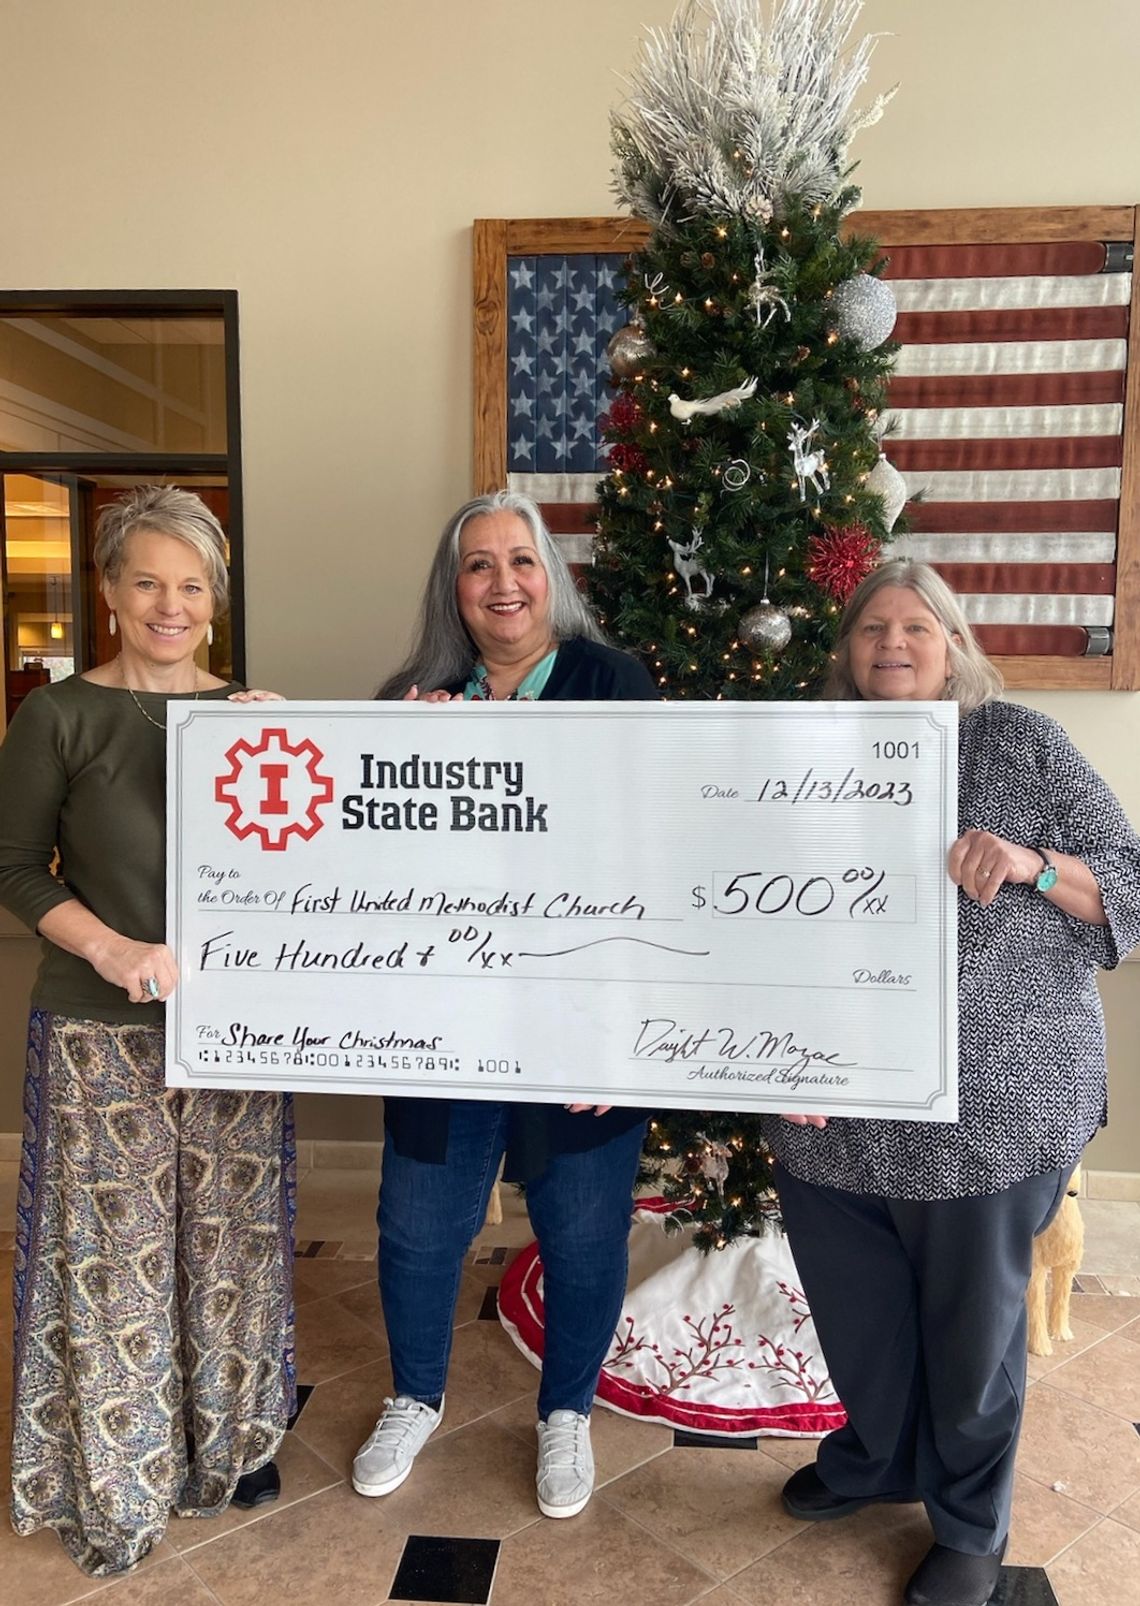 INDUSTRY STATE BANK DONATES TO FIRST UNITED METHODIST CHURCH